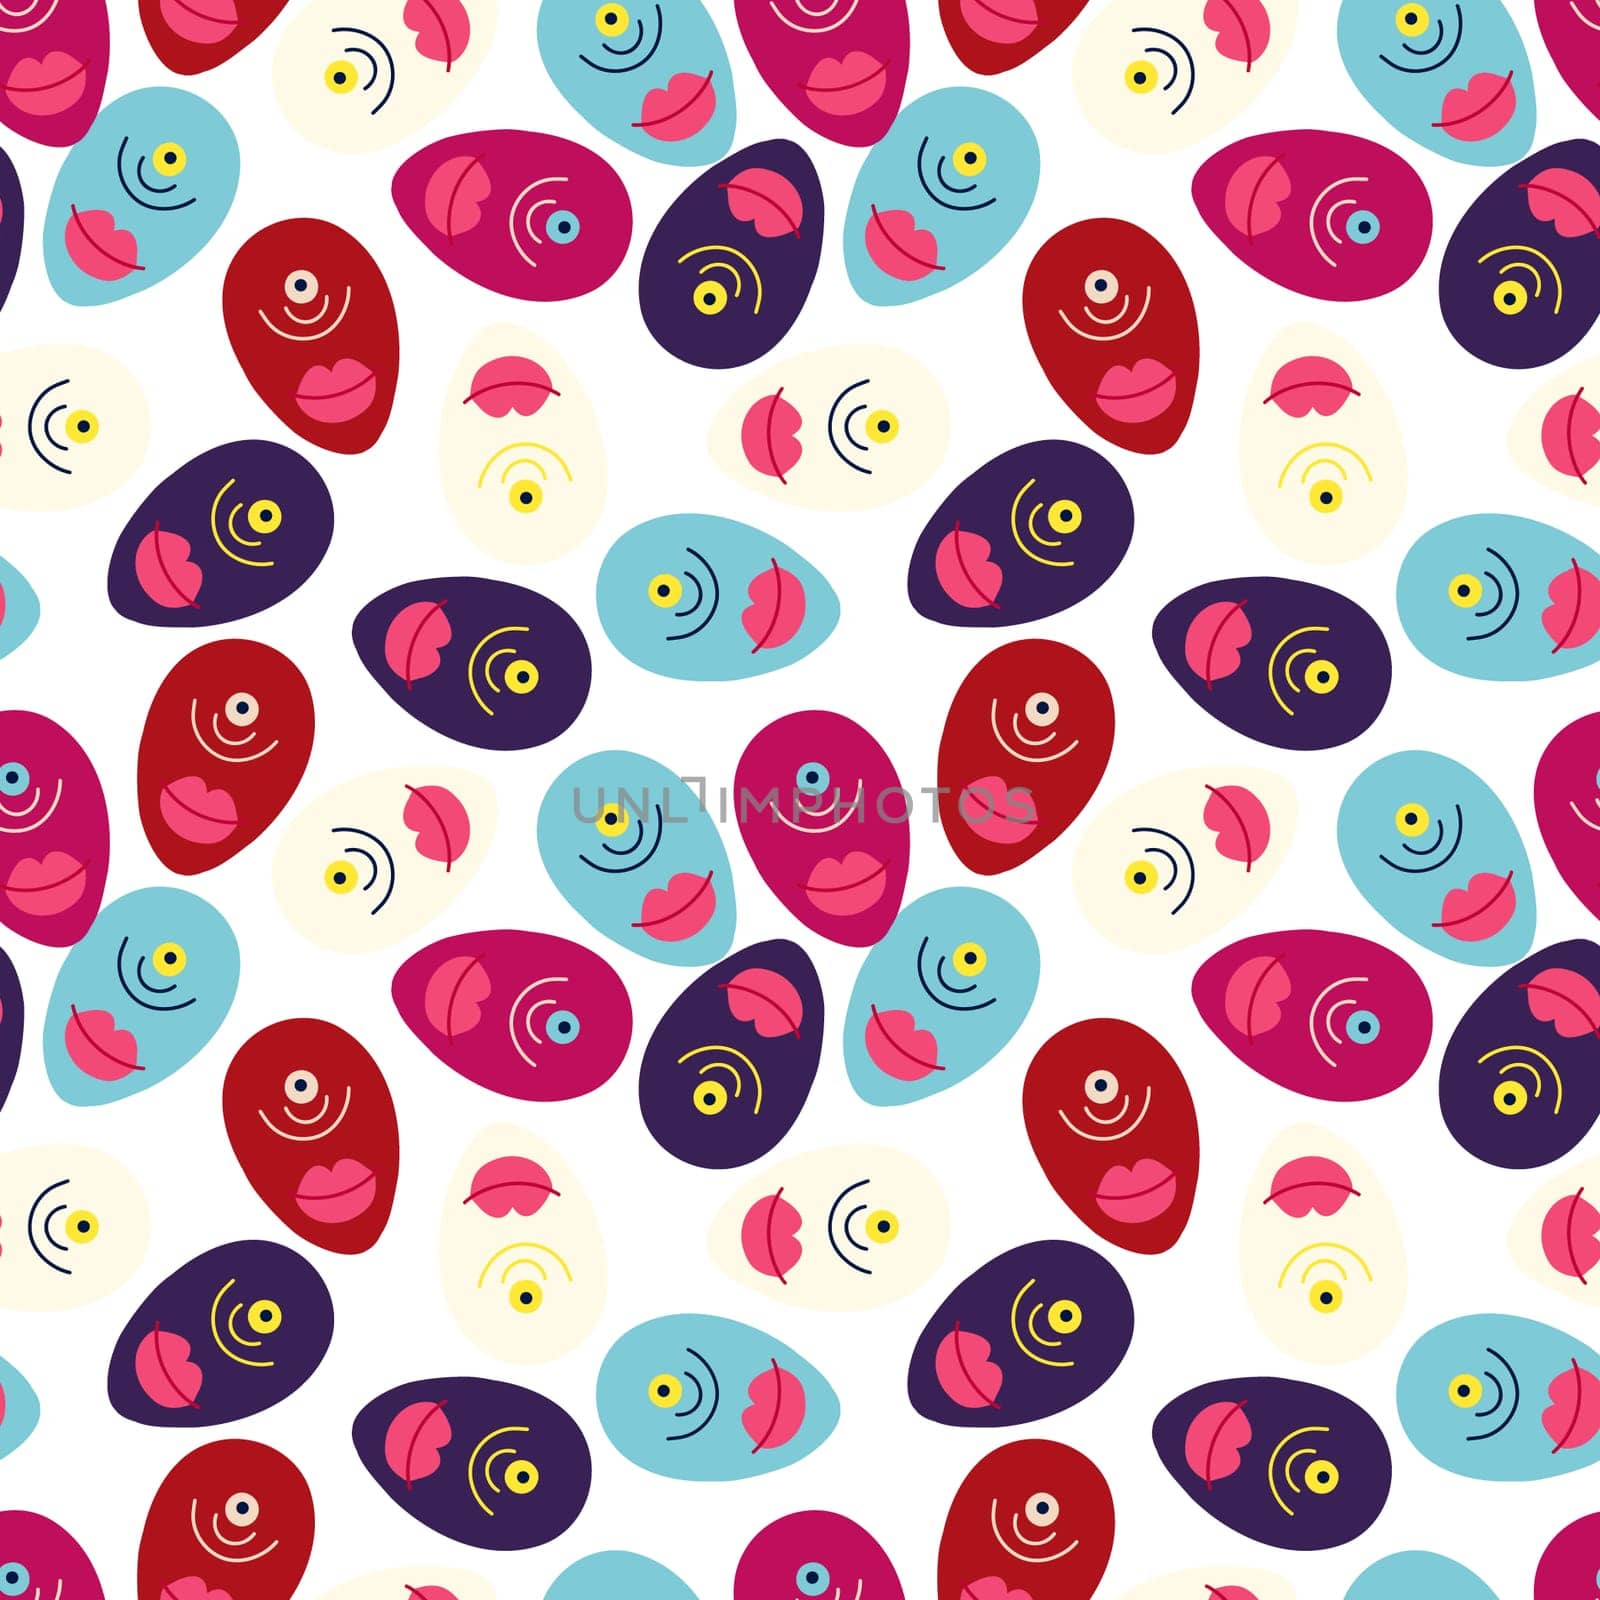 A pink background with a pattern of faces and lips by Dustick